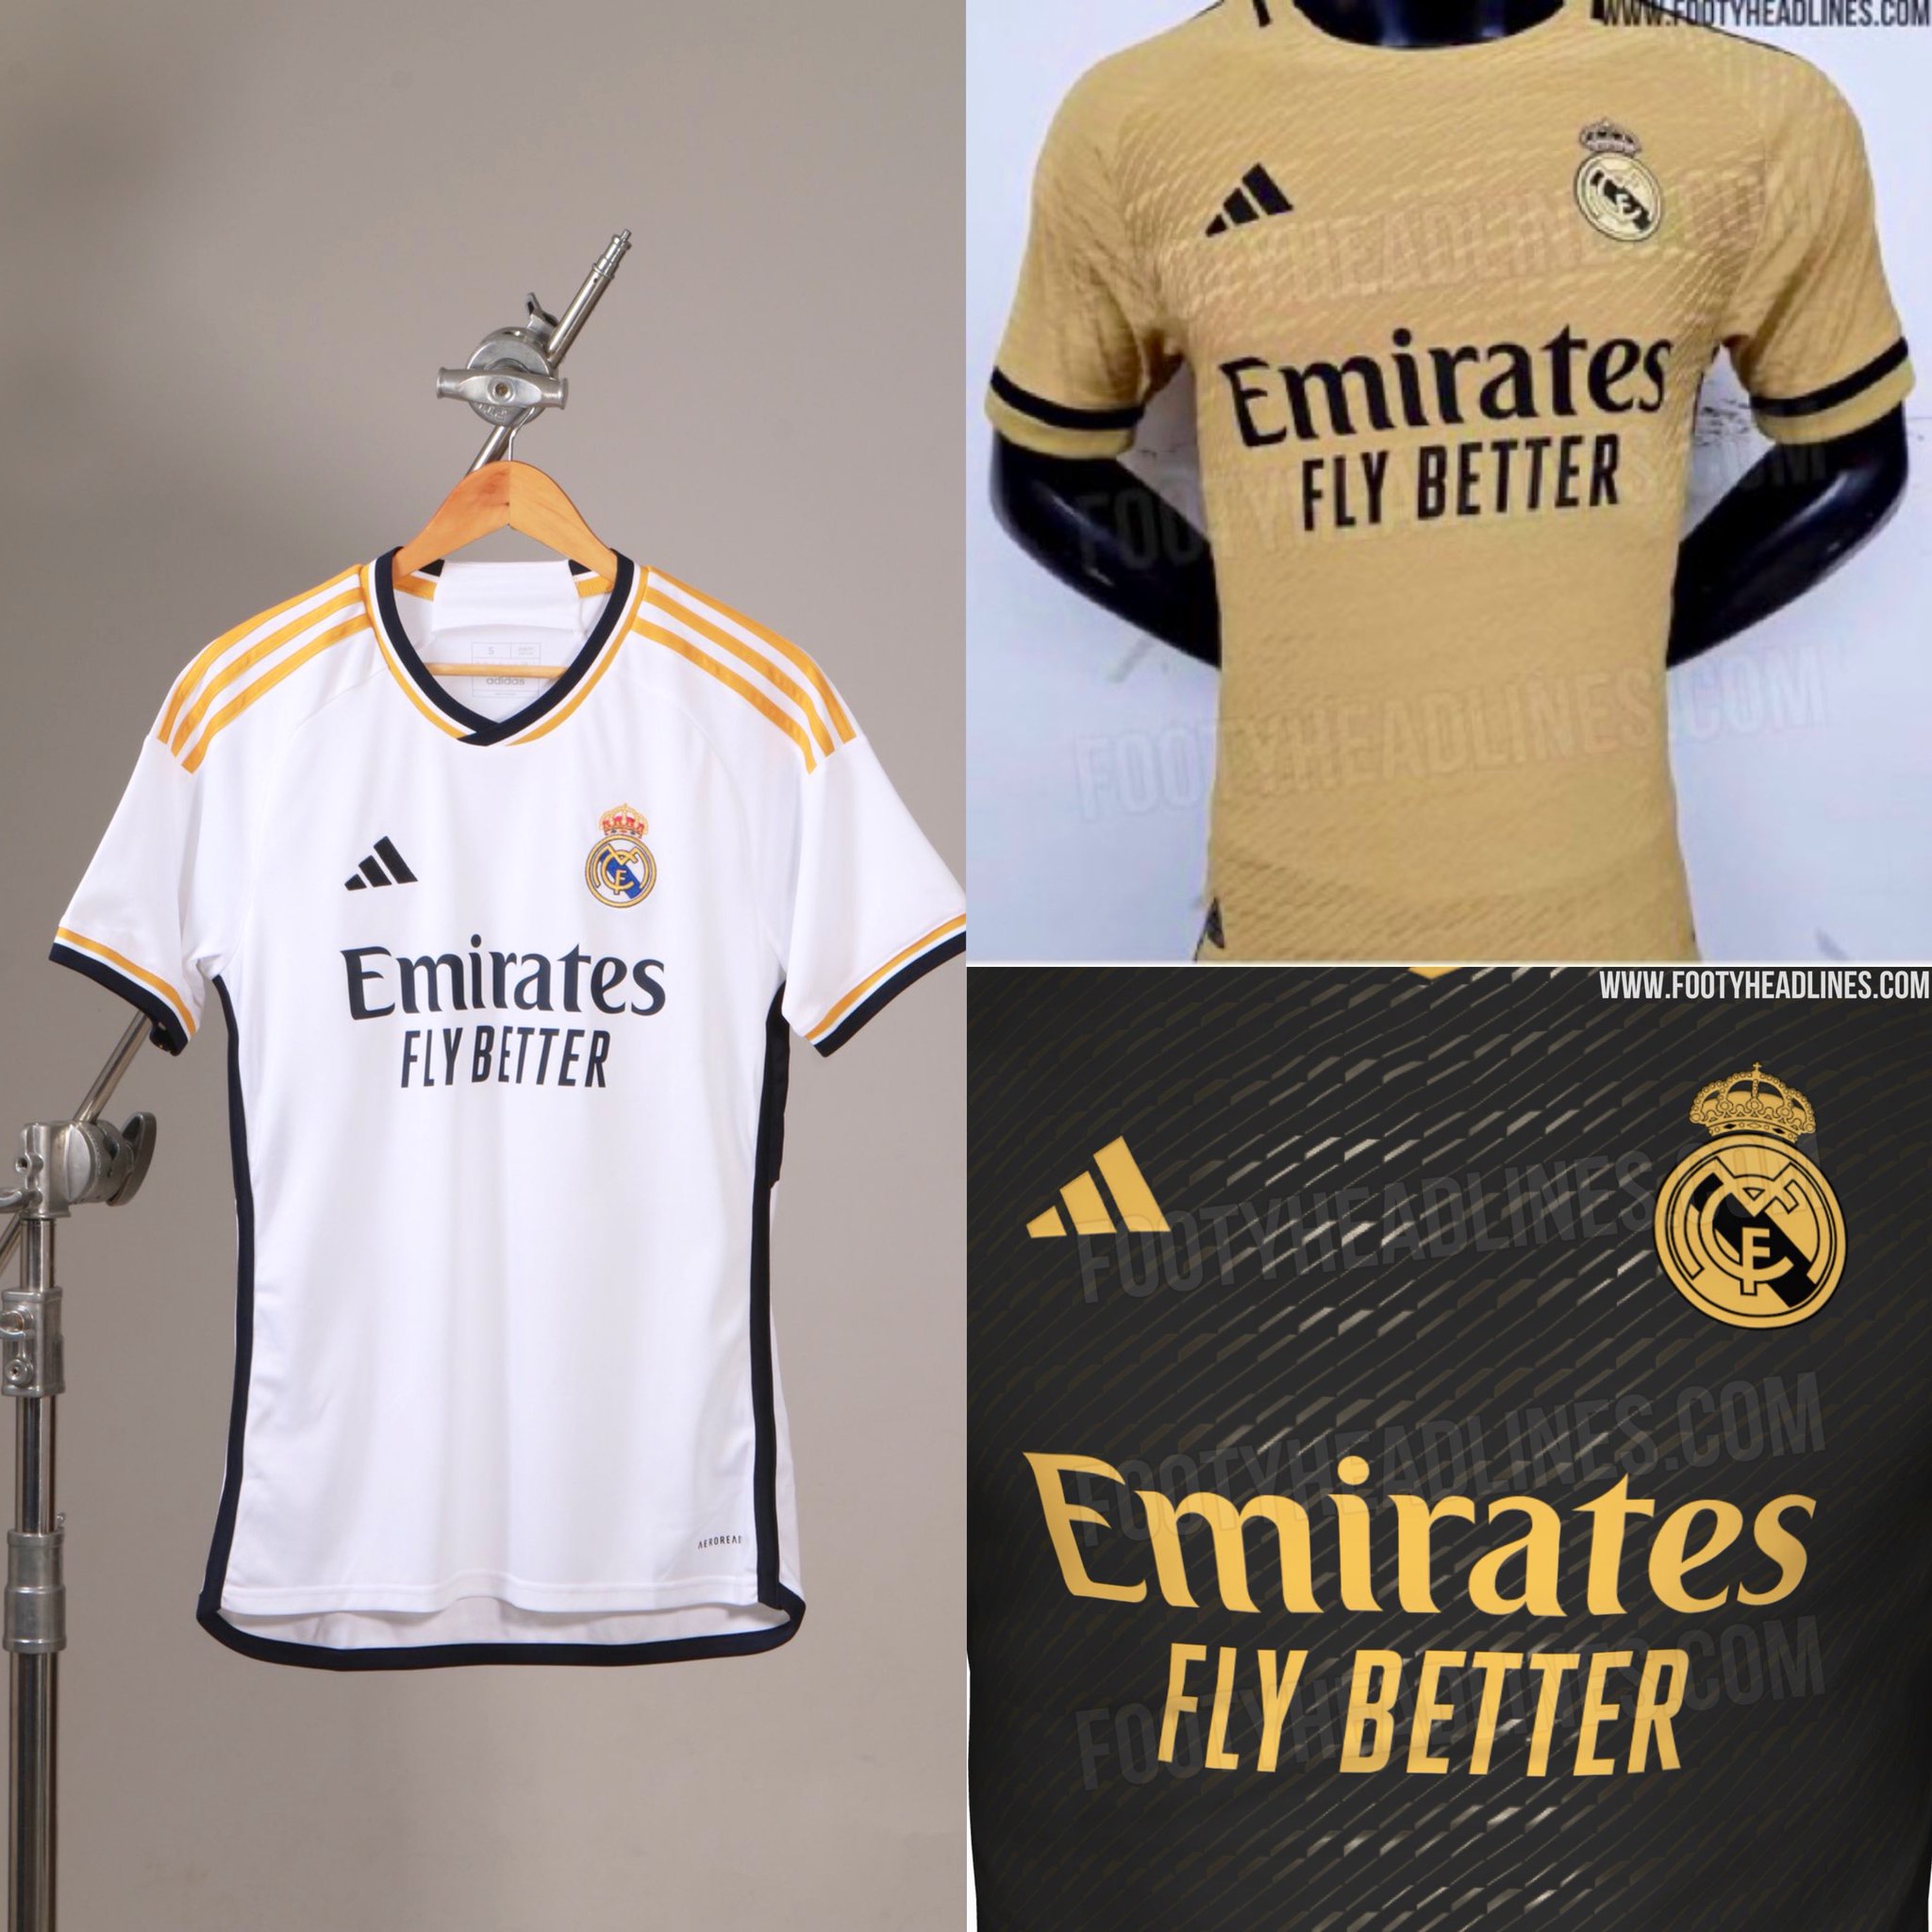 agricultores Dar una vuelta Generosidad Madrid Zone on Twitter: "👕 LEAKED: Real Madrid kits for 2023-2024, as per  latest leaks. ⚪️🌕⚫️ https://t.co/G38atOaFDk" / Twitter